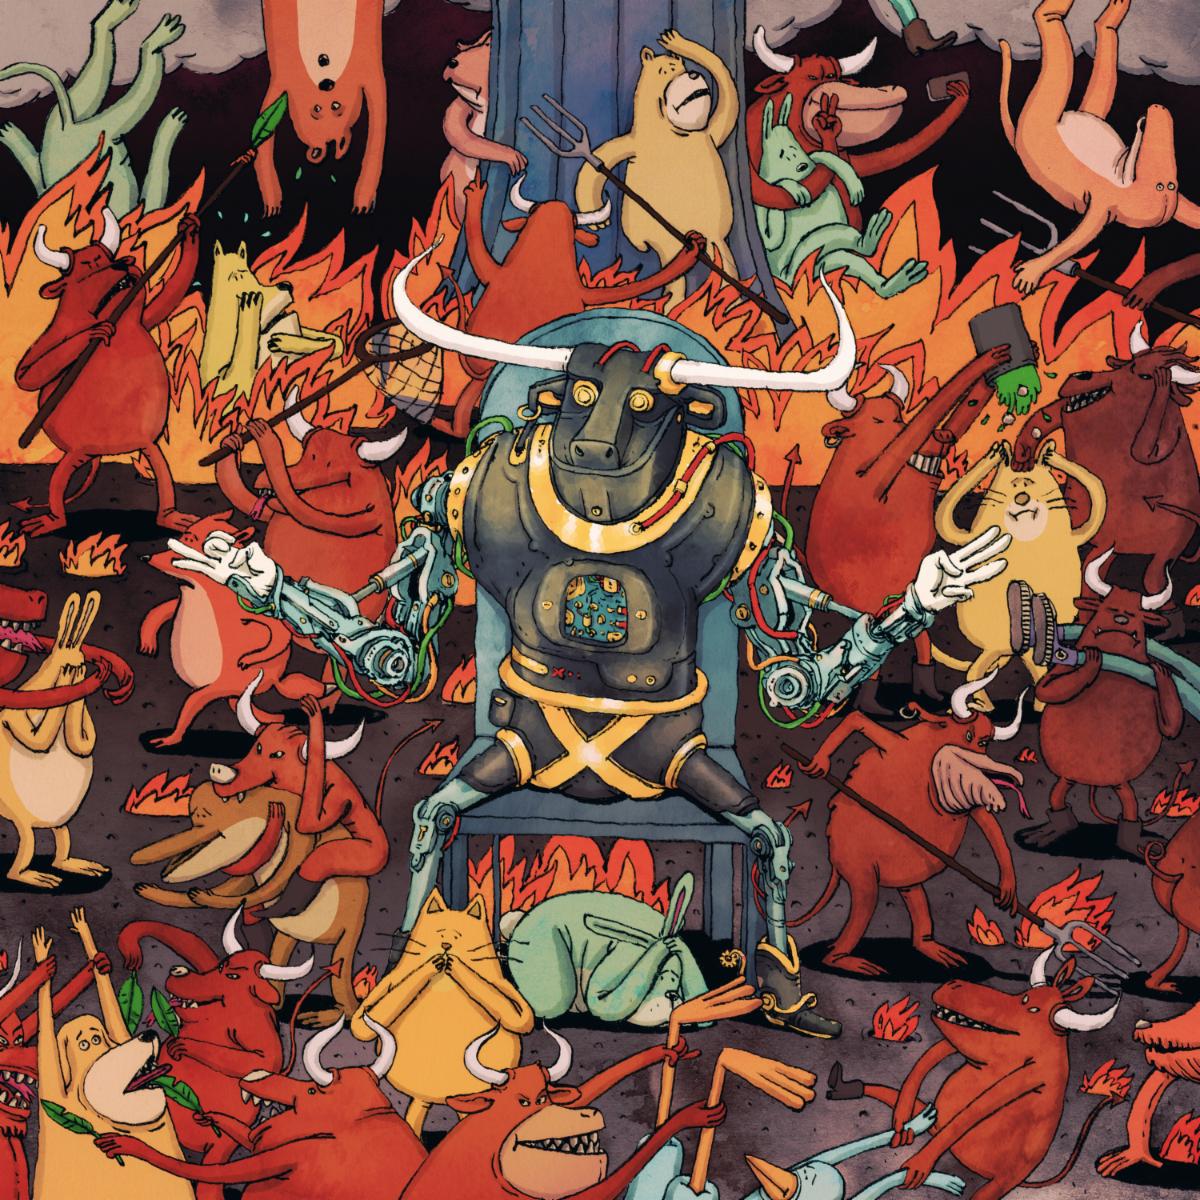 Dance Gavin Dance's 'Afterburner' Tops Charts A Second Time Following Physical Release